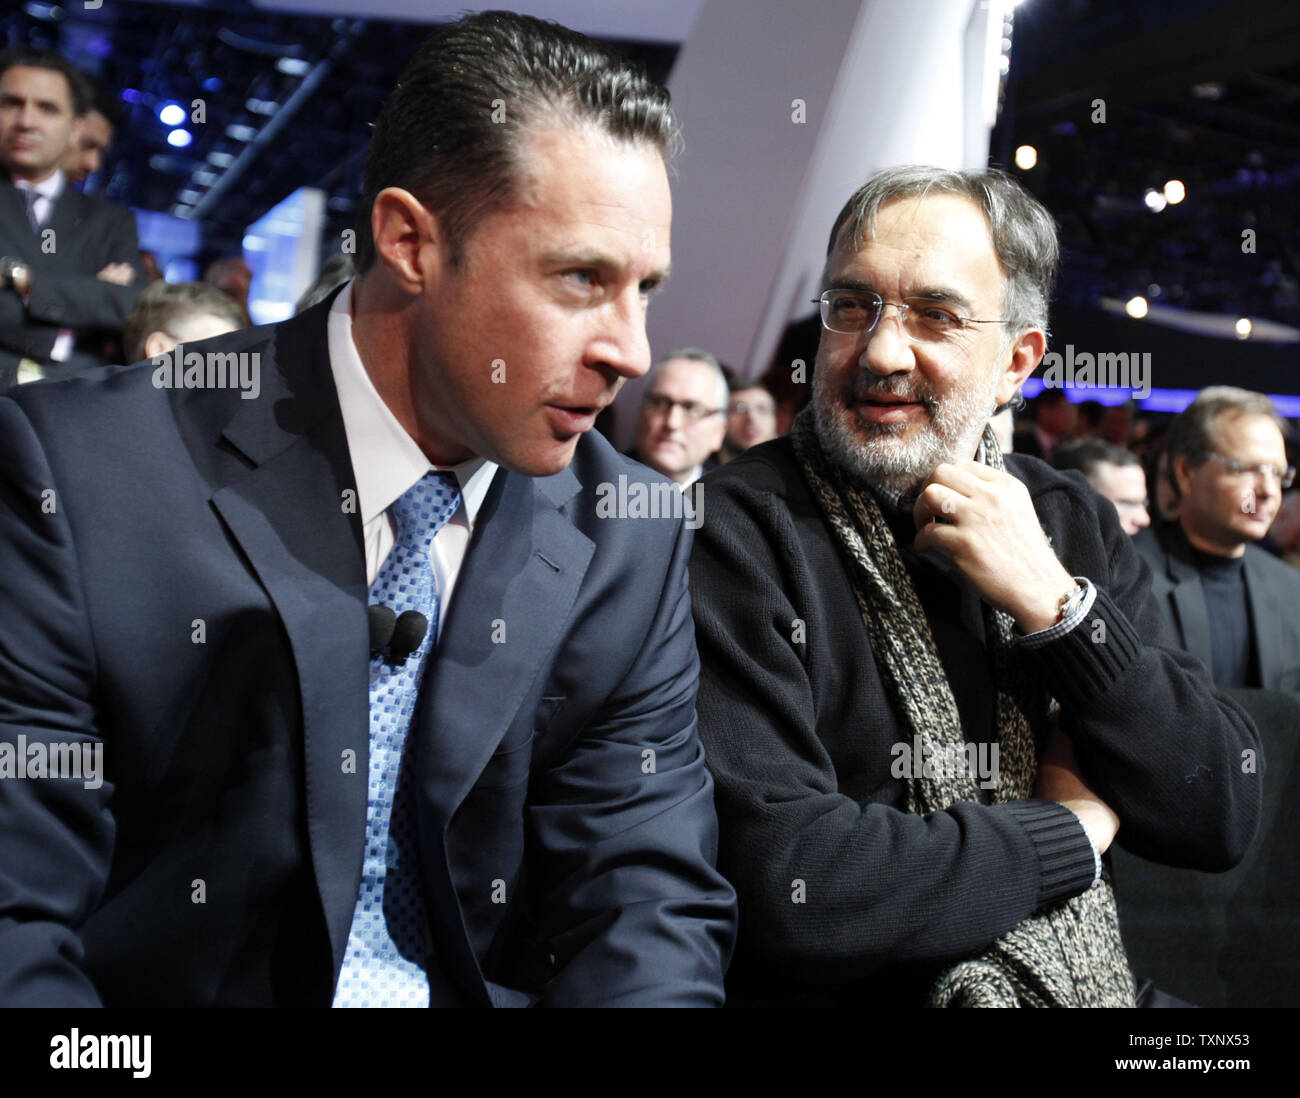 Sergio Marchionne, right, Chairman and CEO of Chrysler Group and Fiat talks with Reid Bigland, left, President and CEO of Dodge before their presentation to reveal the new Dodge Dart at the 2012 North American International Auto Show at the Cobo Center in Detroit, January 9, 2012. UPI/Mark Cowan Stock Photo